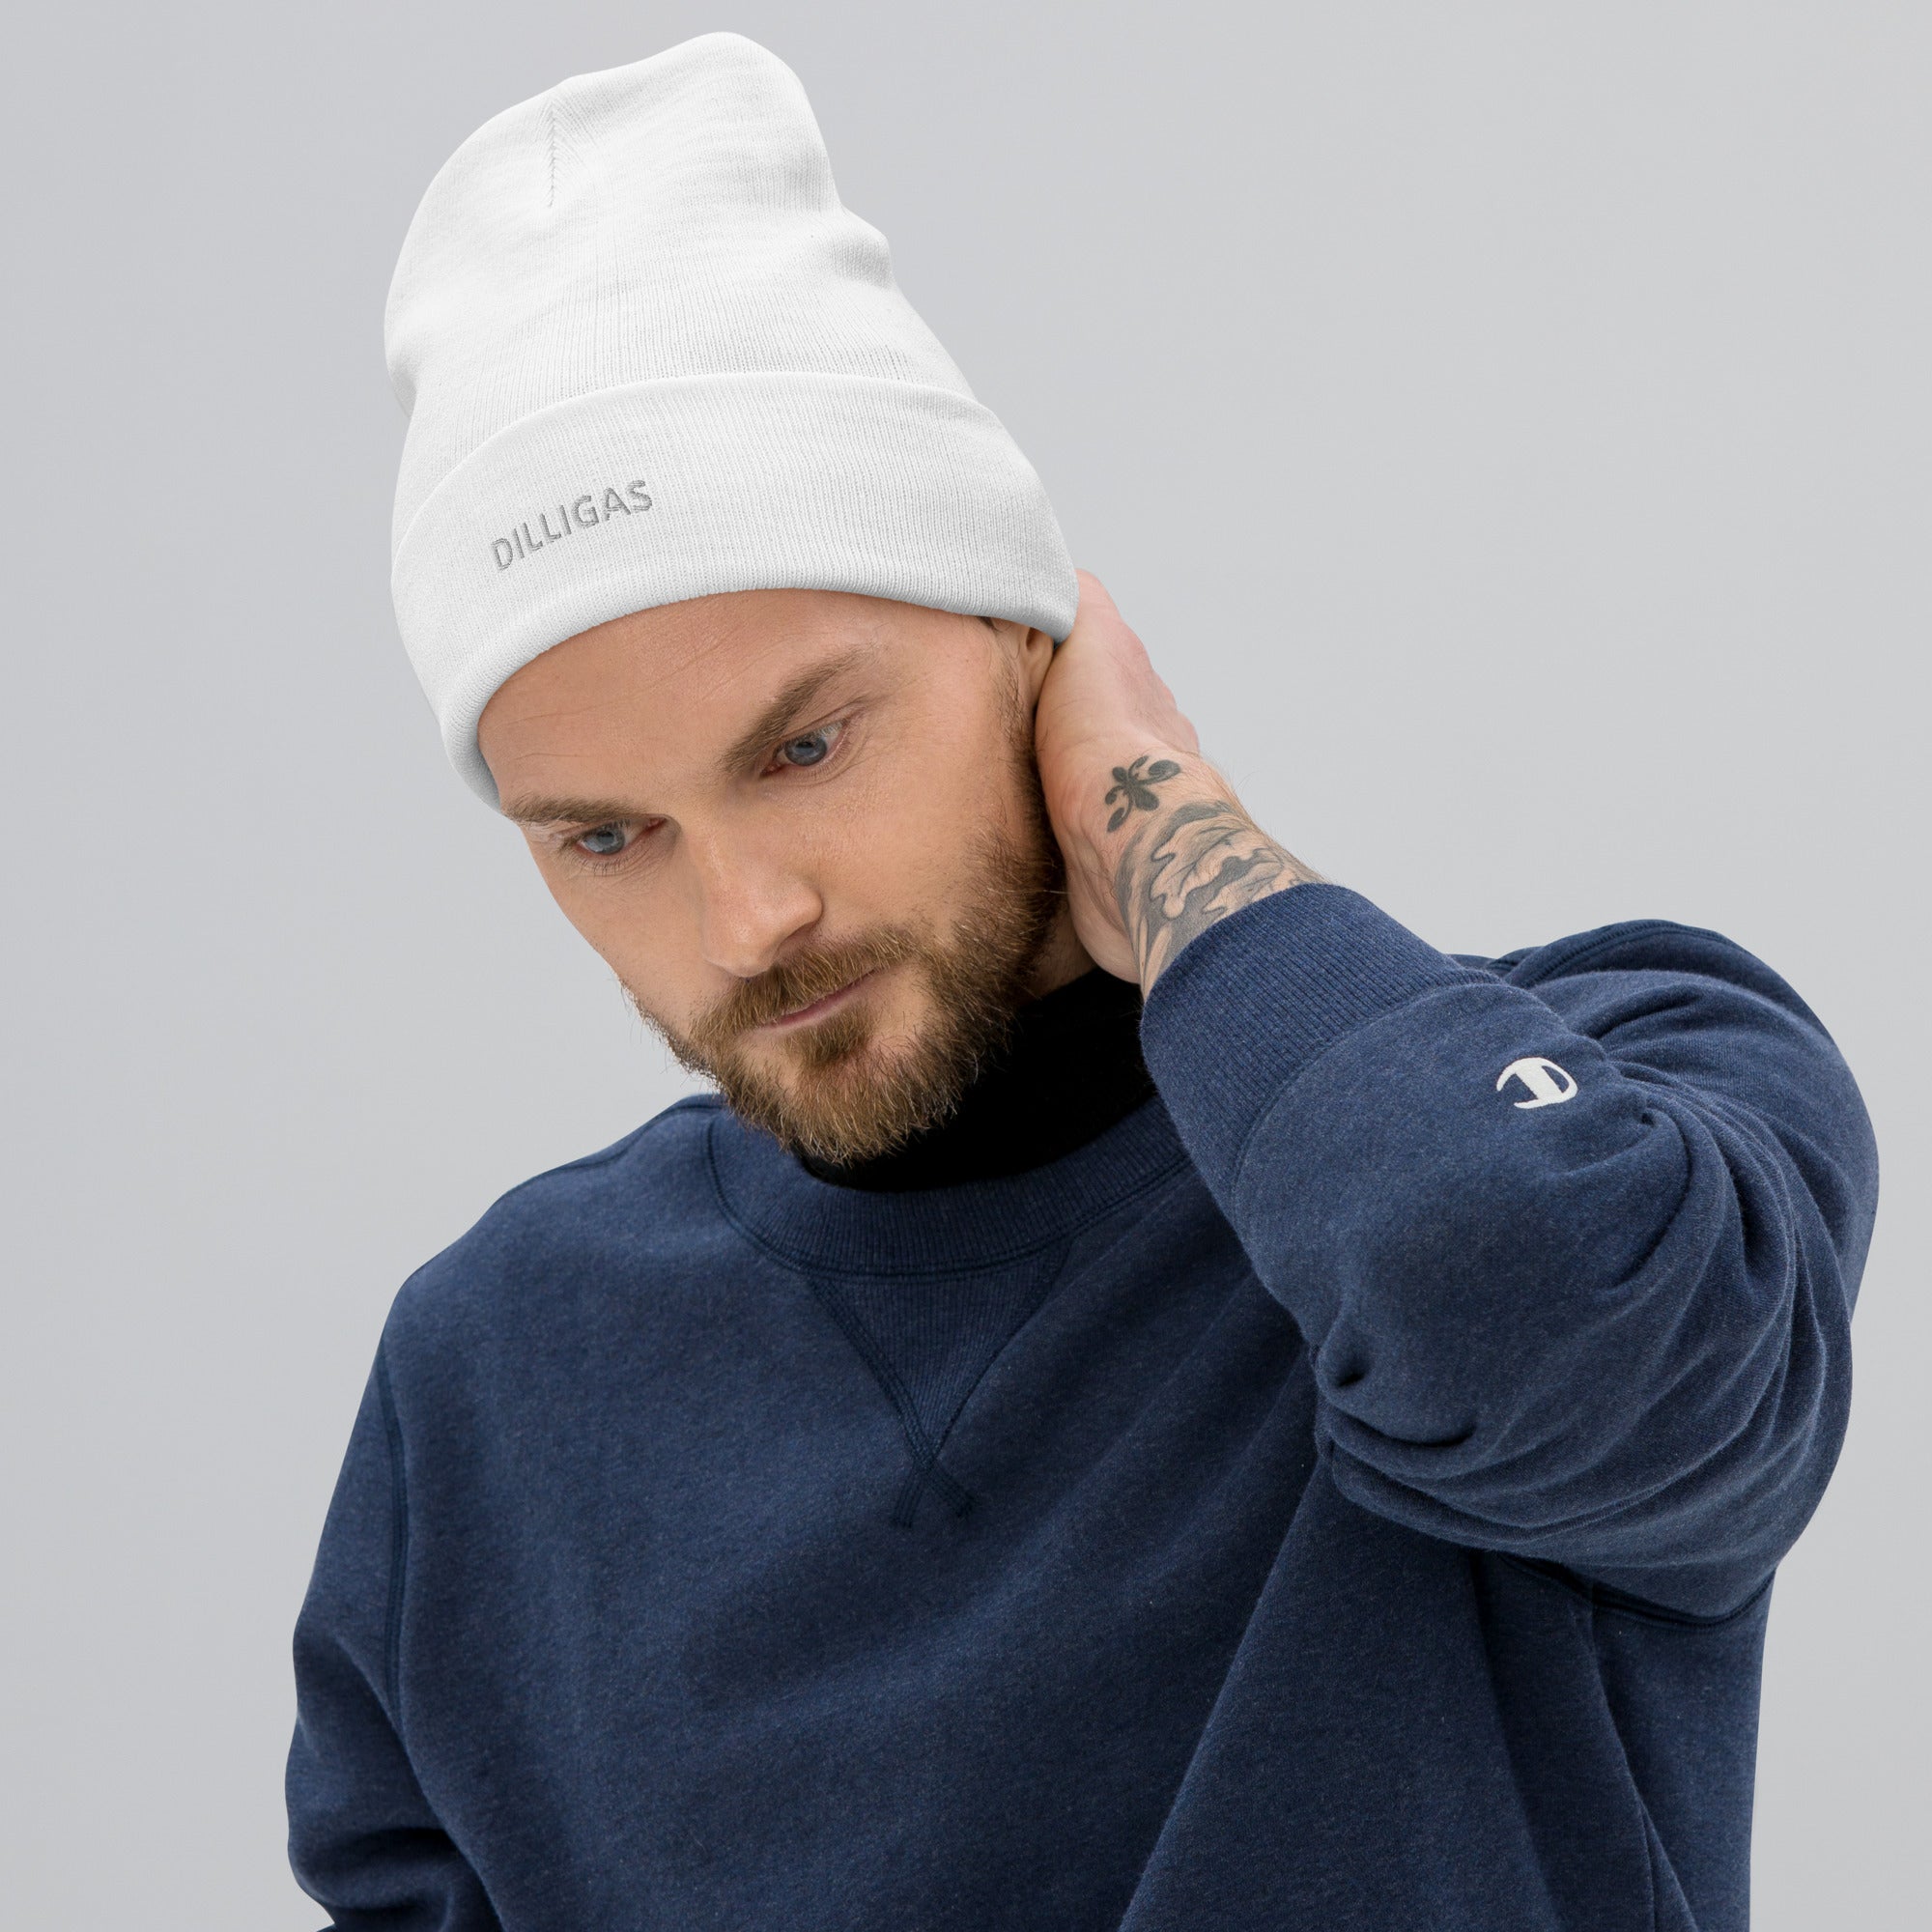 DILLAGAS - Embroidered Beanie